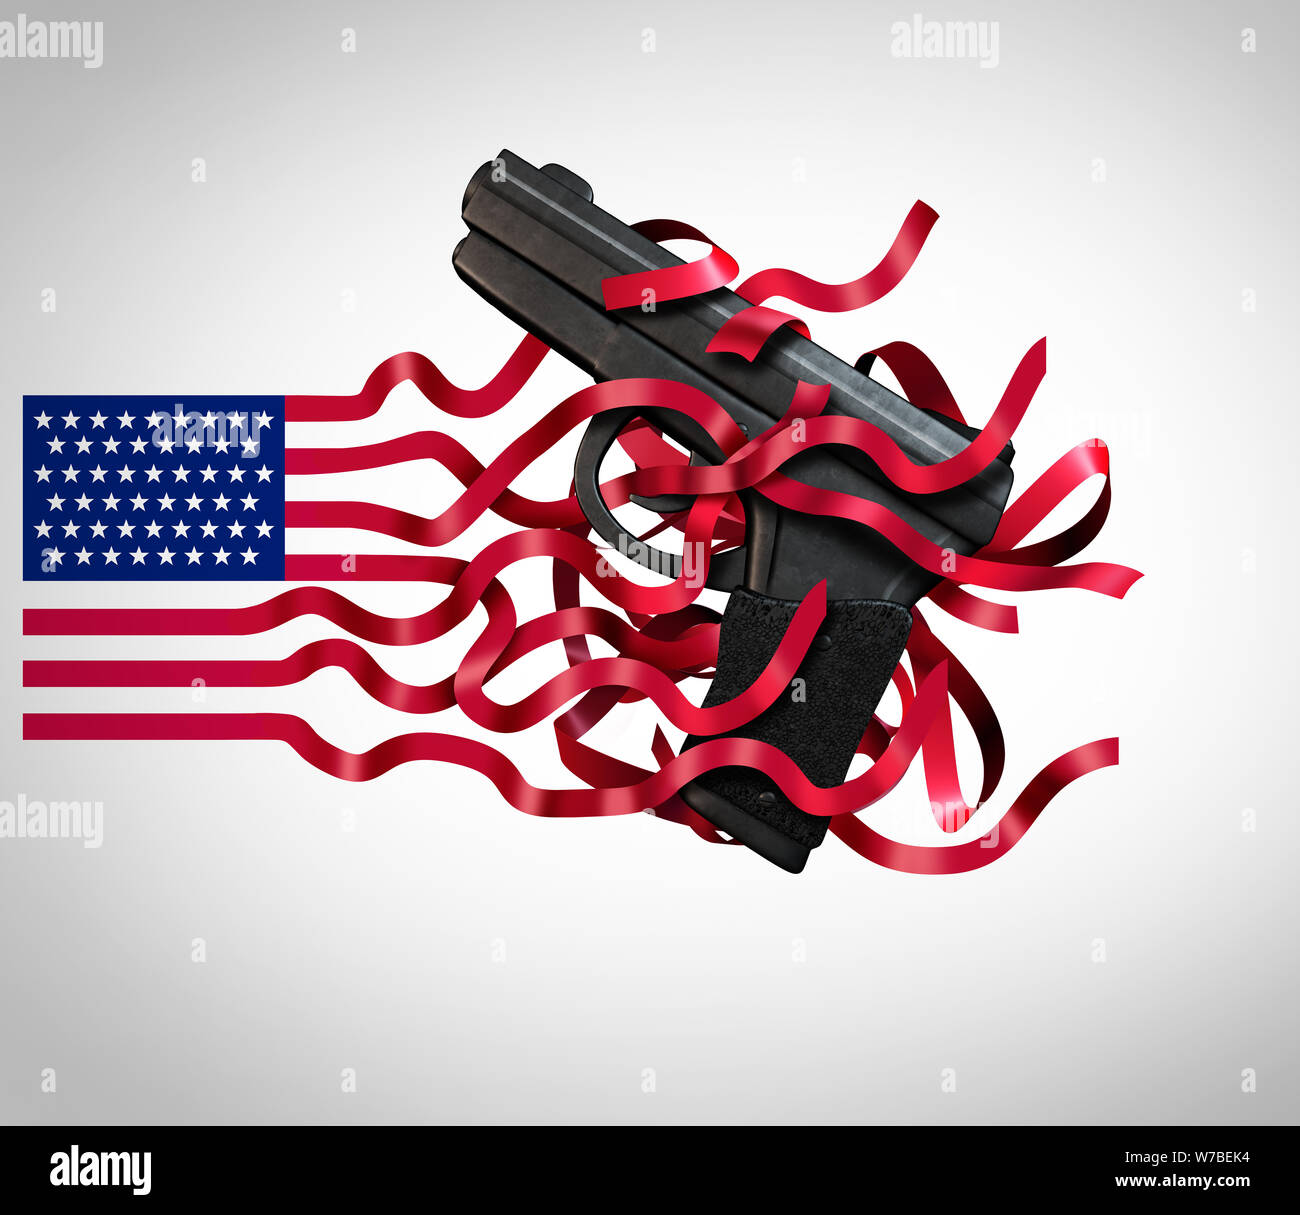 Guns in the USA and gun violence in the United States and the second amendment of the American constitution as a firearms political social issue. Stock Photo